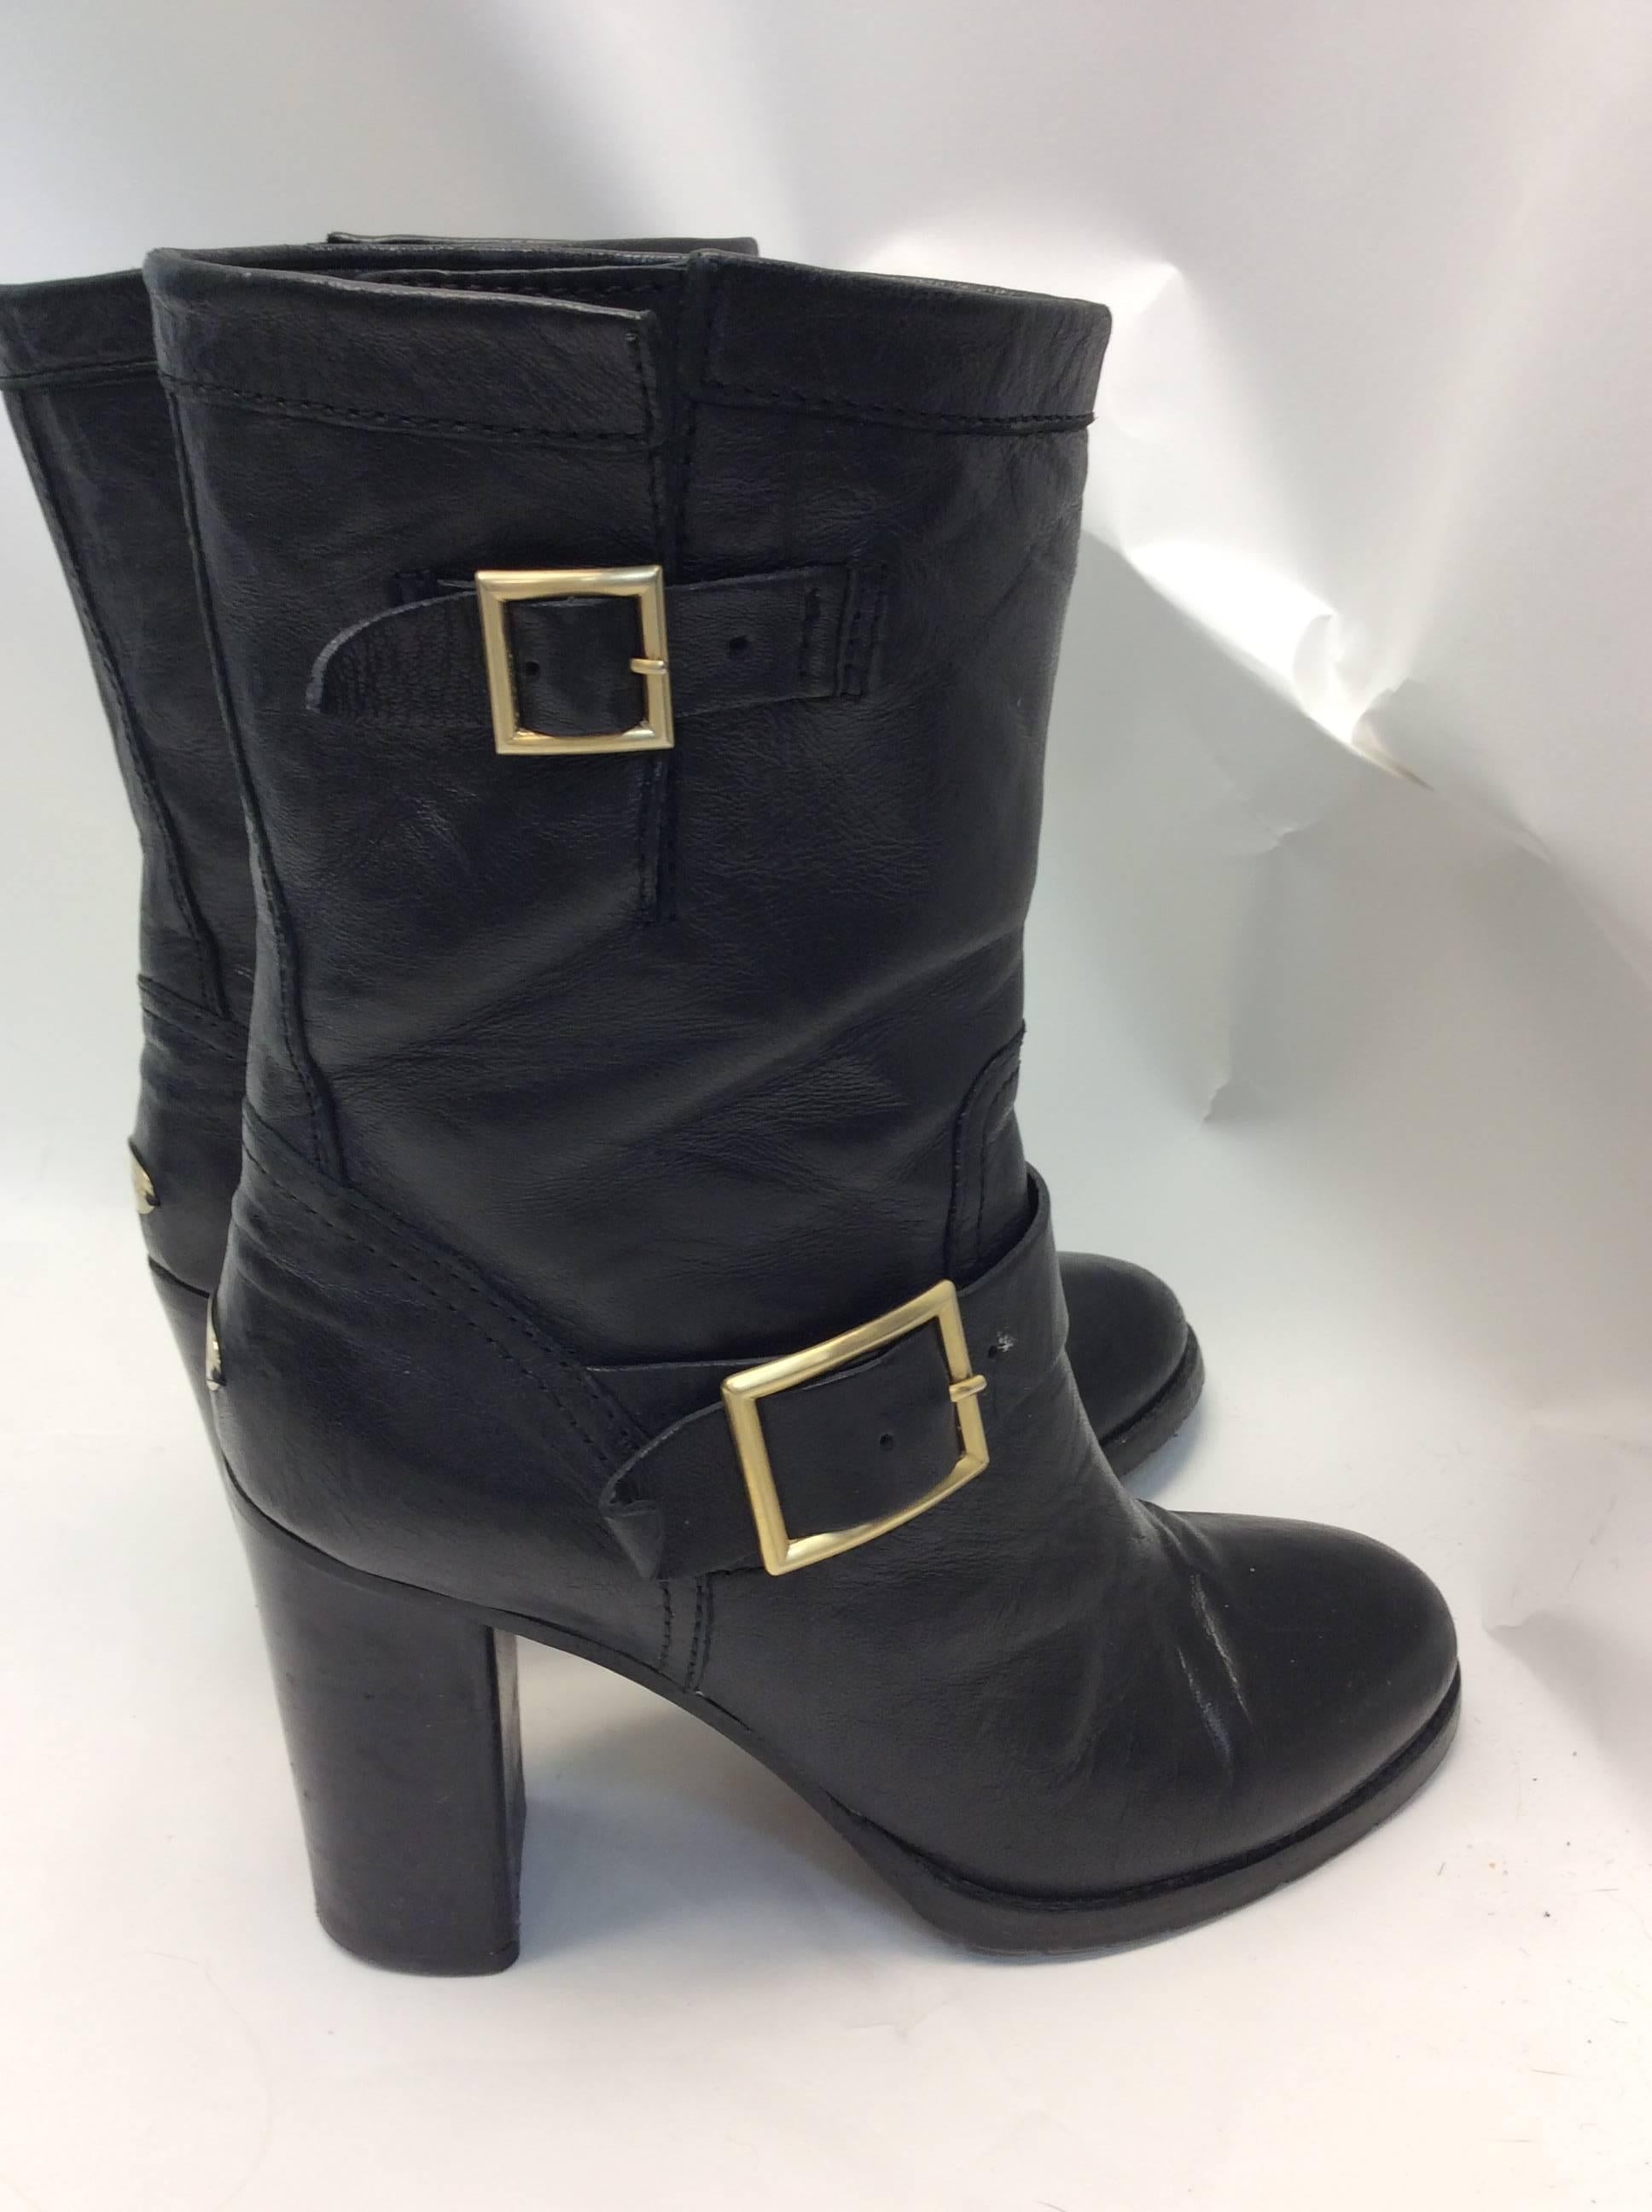 Jimmy Choo Black Leather Buckle Ankle Boots
3.5 inch heels
$599
Two gold buckle details